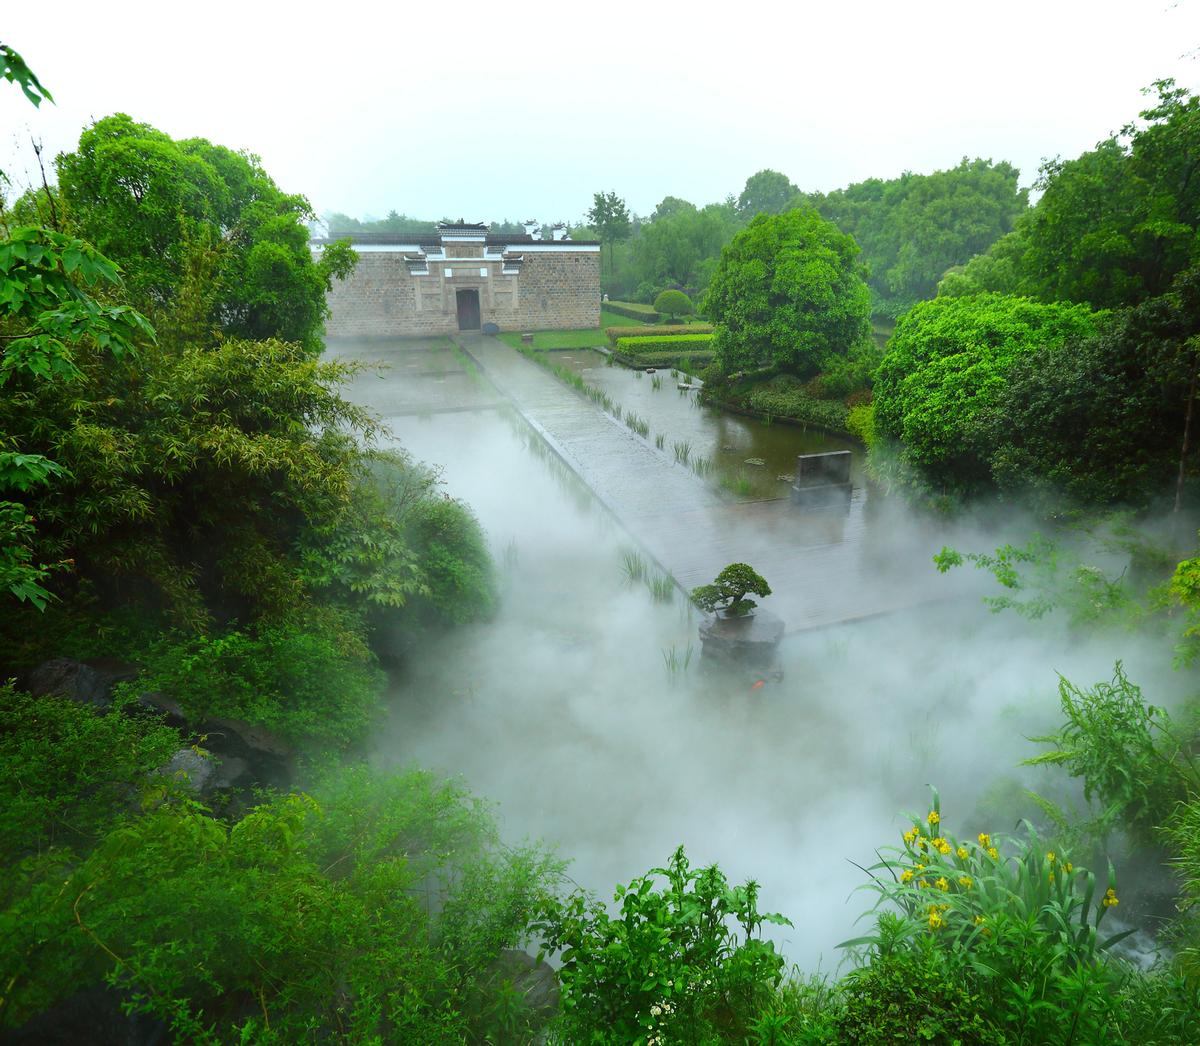 Amanyangyun, as the retreat will be called, gets its name from the phrase ‘Yang Yun,’ meaning ‘the nourishing of clouds' / 